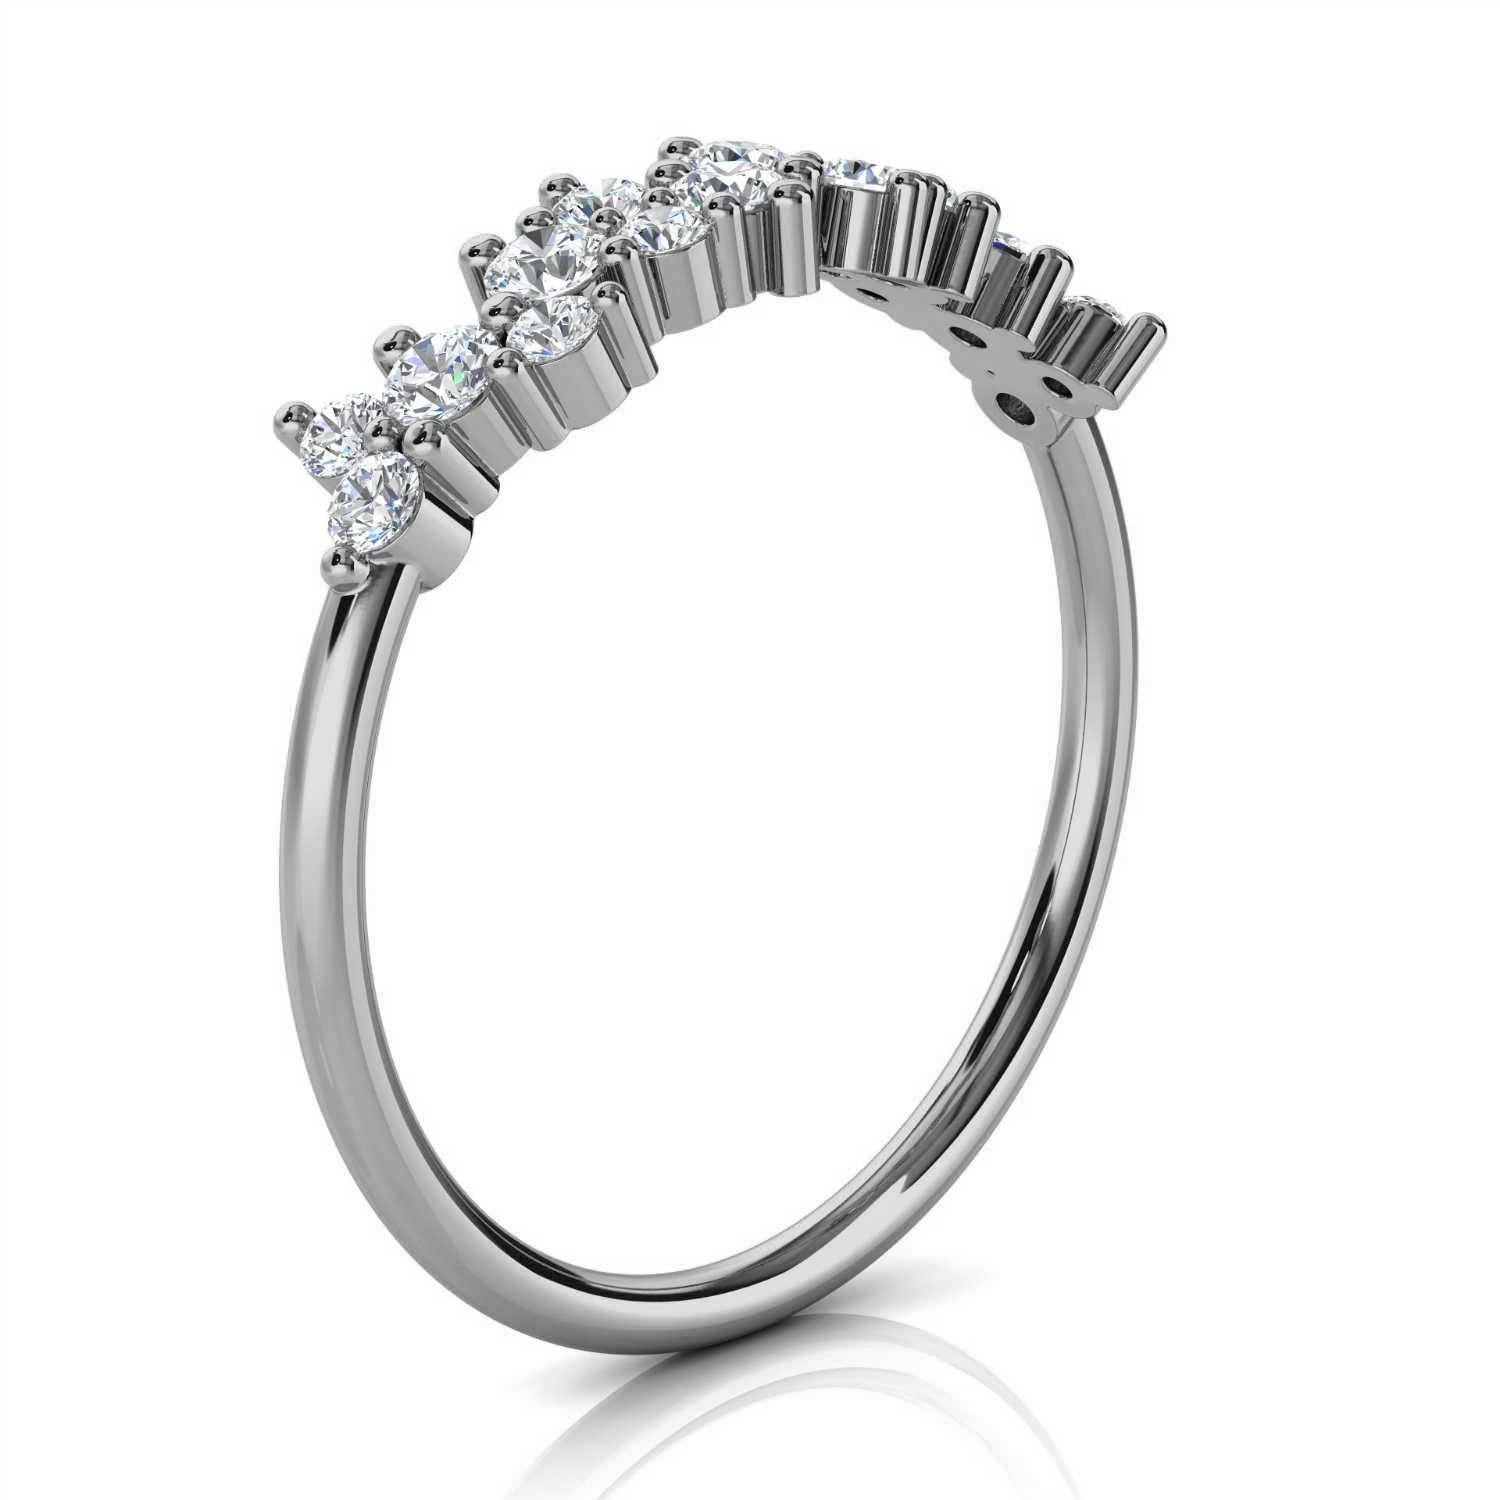 This Delicate ring features sixteen(16) round brilliant diamonds scattered on top of a 1.2 mm band. The tiny prongs that hold the diamonds enhance its organic look. Stack it- It's perfect! Experience the difference in person!

Product details: